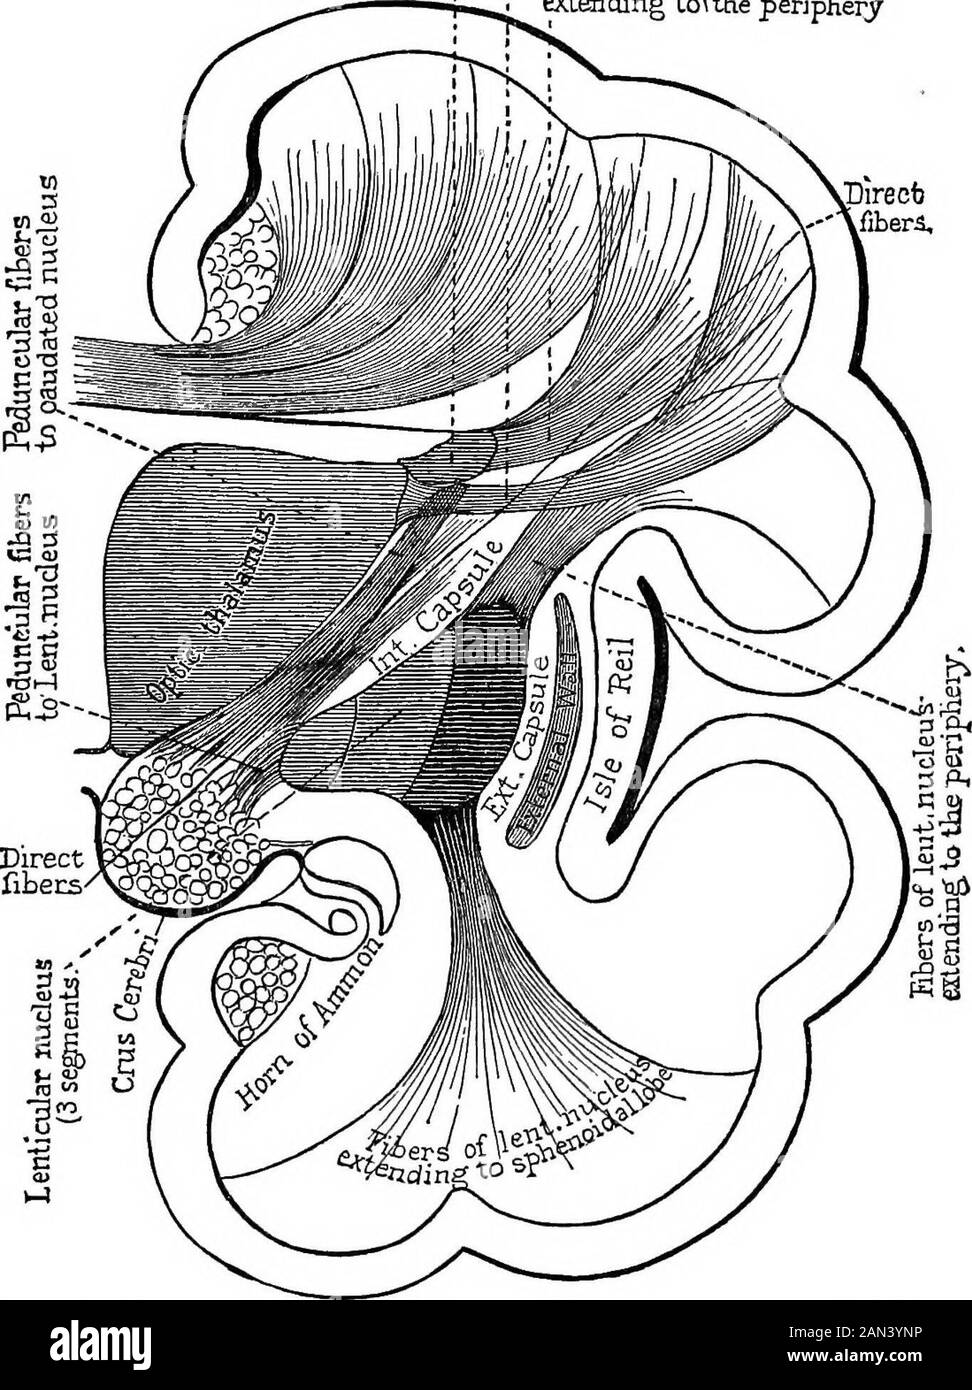 Lectures on localization in diseases of the brain, delivered at the Faculté de médecine, Paris, 1875 . r) arecentrifugal and connected with movements of the limbs,while others (the posterior) are centripetal and connectedwith the transmission of sensorial impressions (Fig. i8). To sum up, the internal capsule, according to modern re-searches, is composed as follows : 1st. By the direct peduncular fasciculi, which traverse thecapsule without entering the ganglia. 2d. By the indirect peduncular fasciculi. Of these someare sent to the corpora striata, which they approach by theinferior face ; o Stock Photo